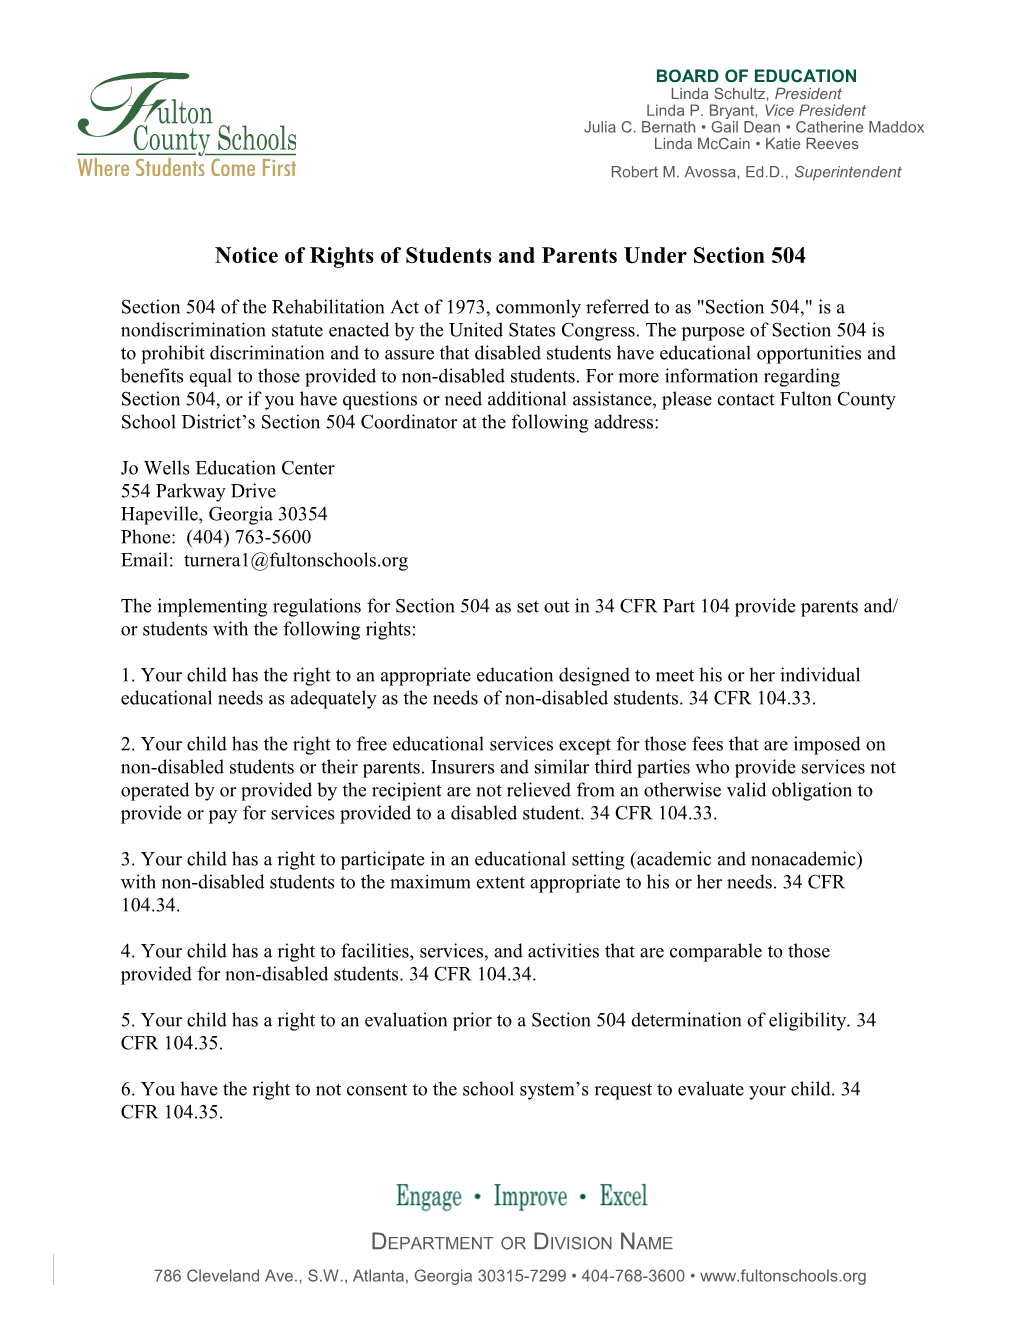 Notice of Rights of Students and Parents Under Section 504